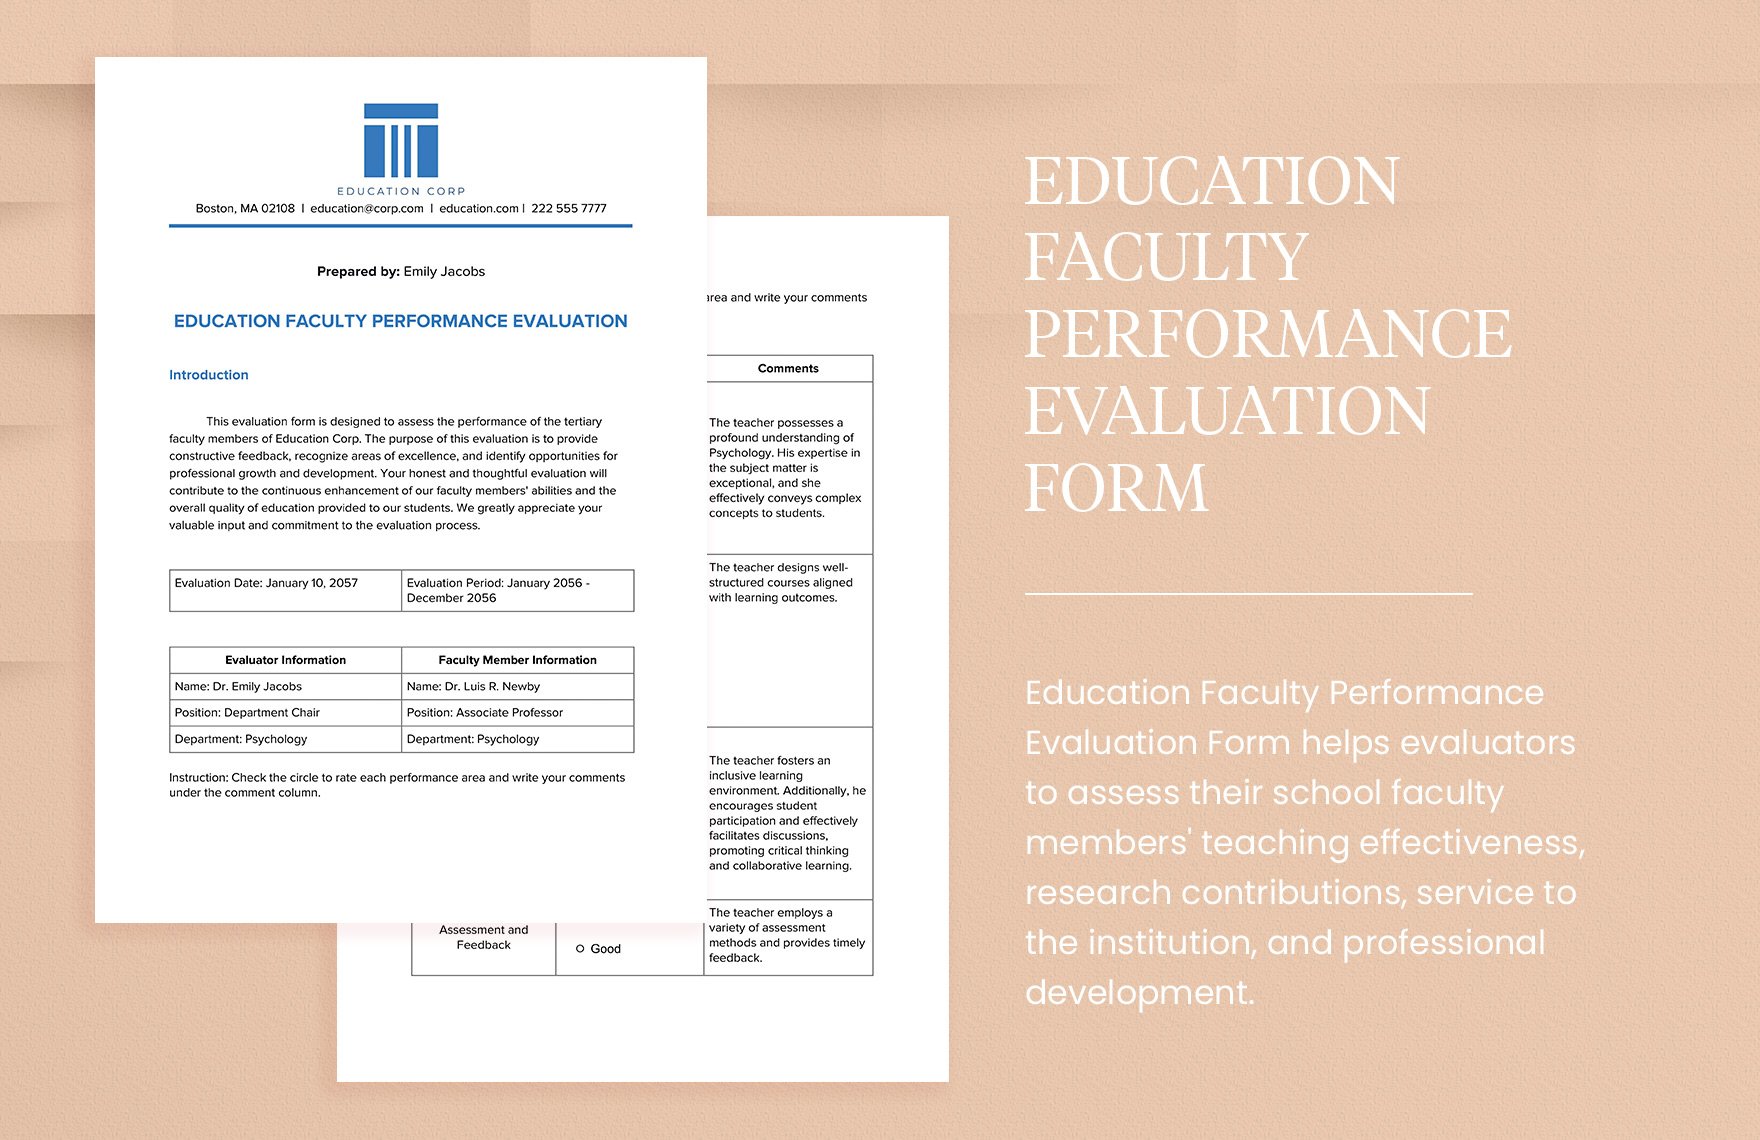 Education Faculty Performance Evaluation Form